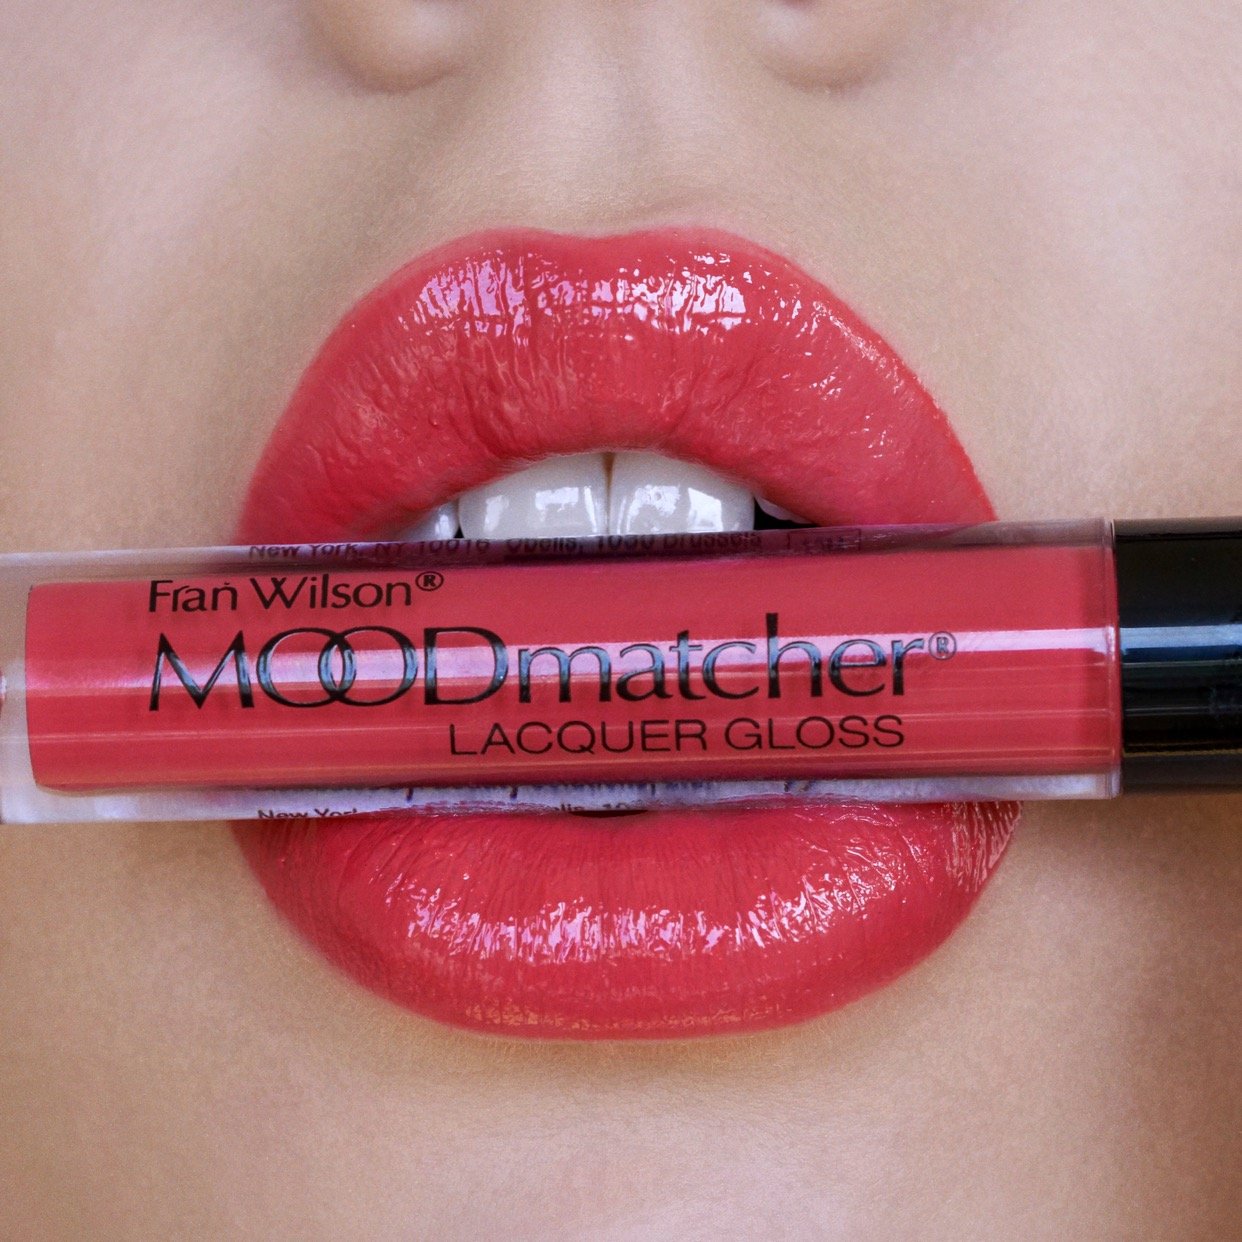 MOODmatcher Lacquer Gloss Pink Perfection